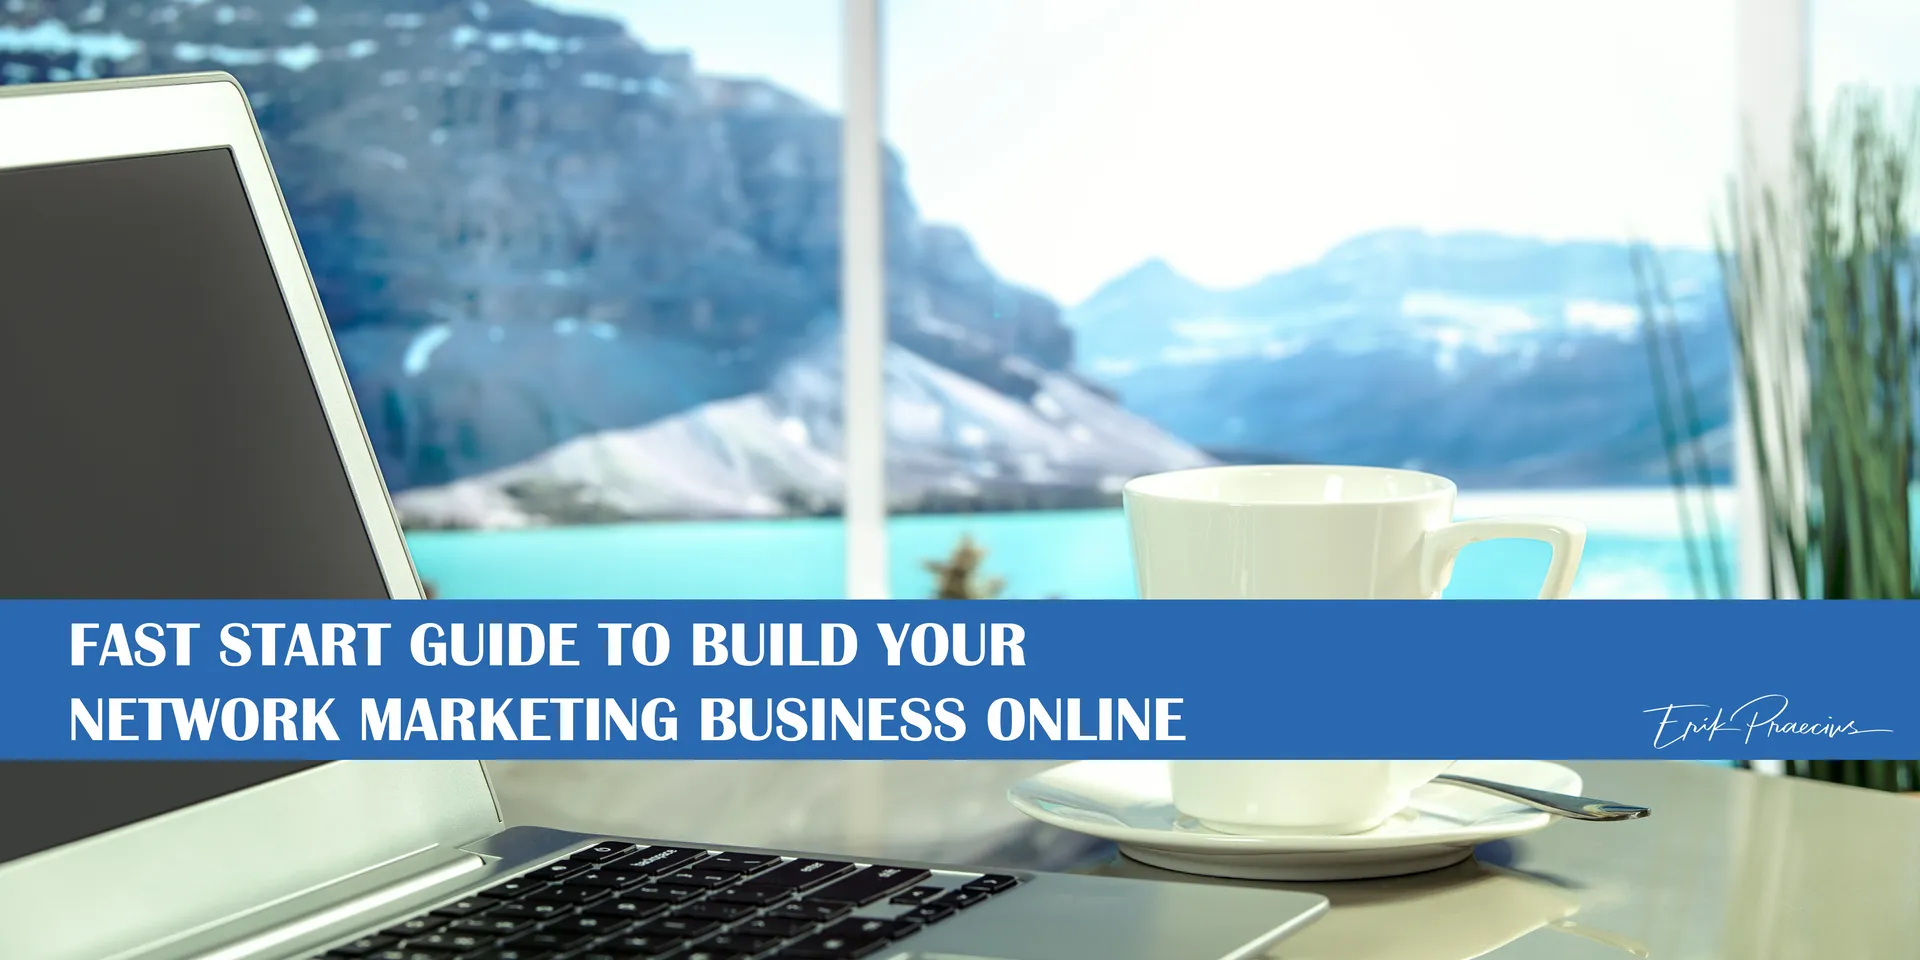 Fast Start Guide to Build Your Network Marketing Business Online (the Right Way).